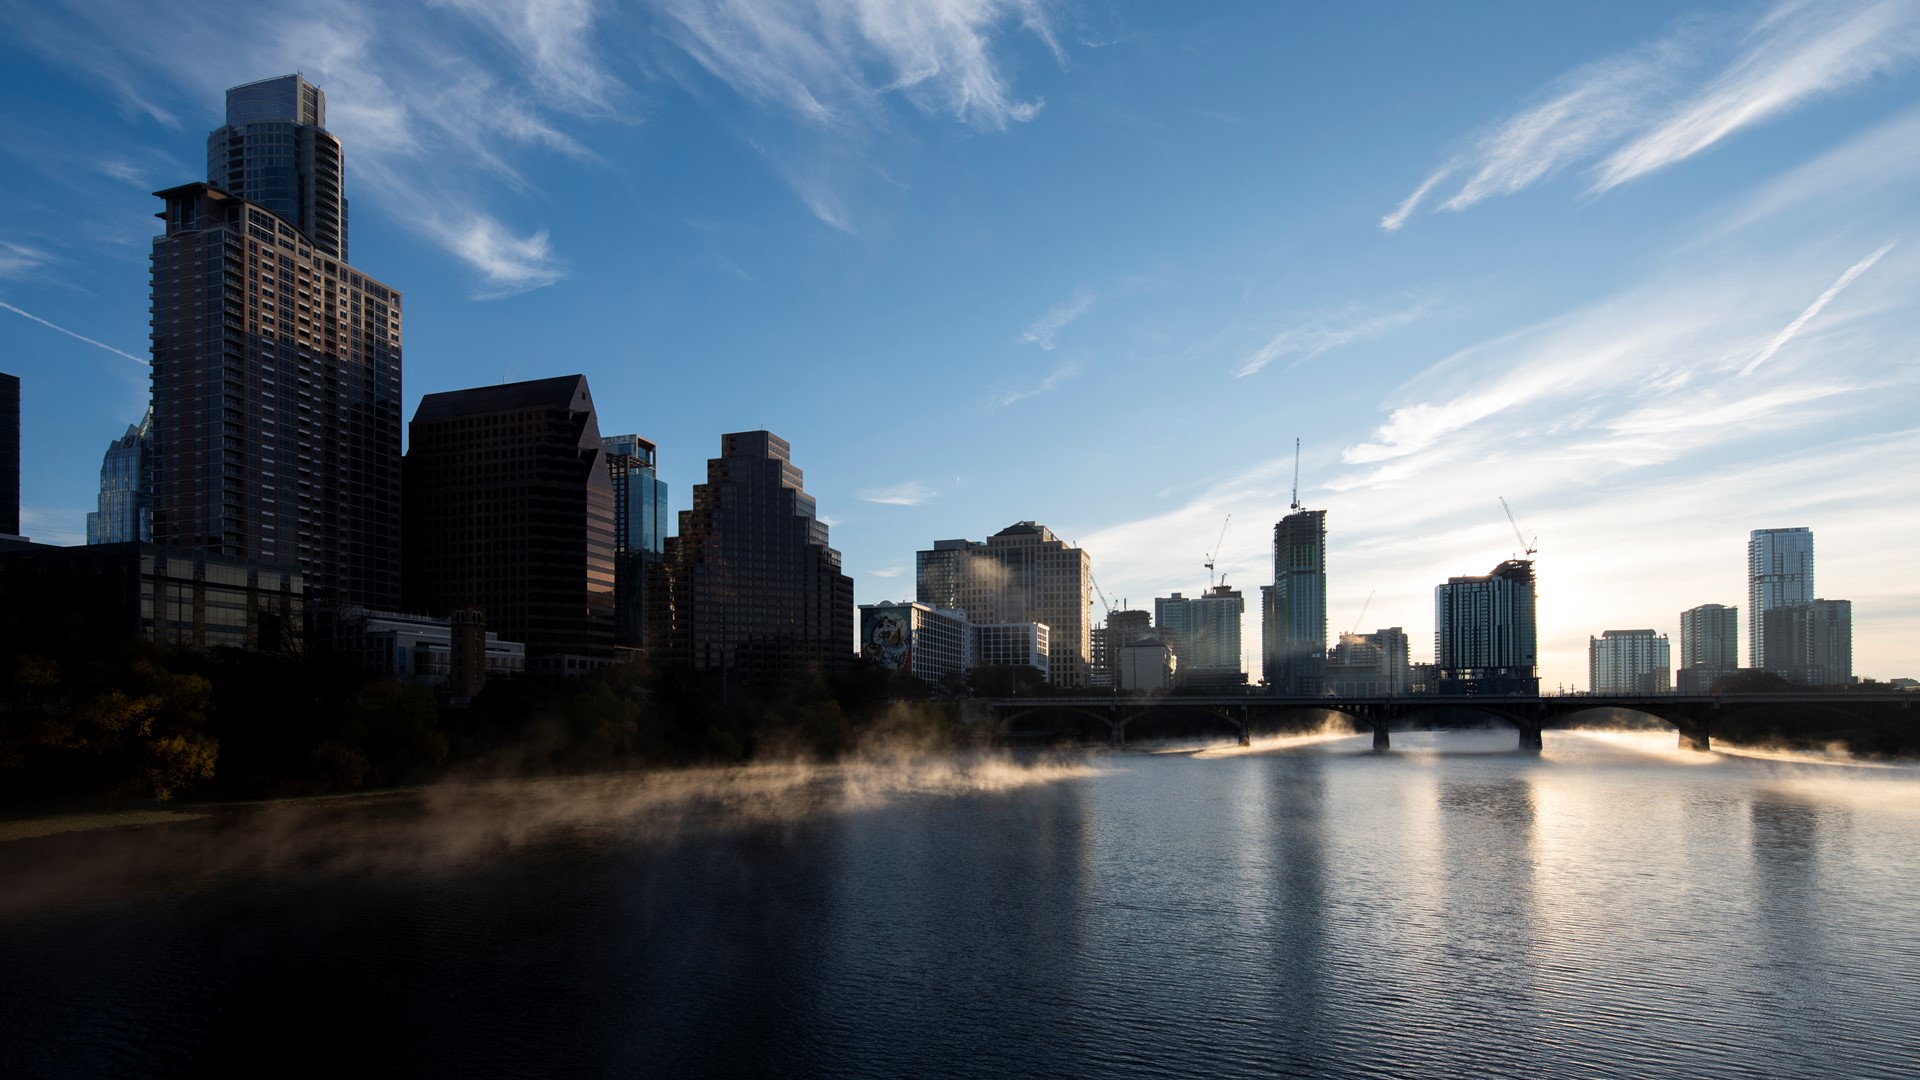 New census data shows the Austin region is no longer the fastest-growing large metro area in the country.